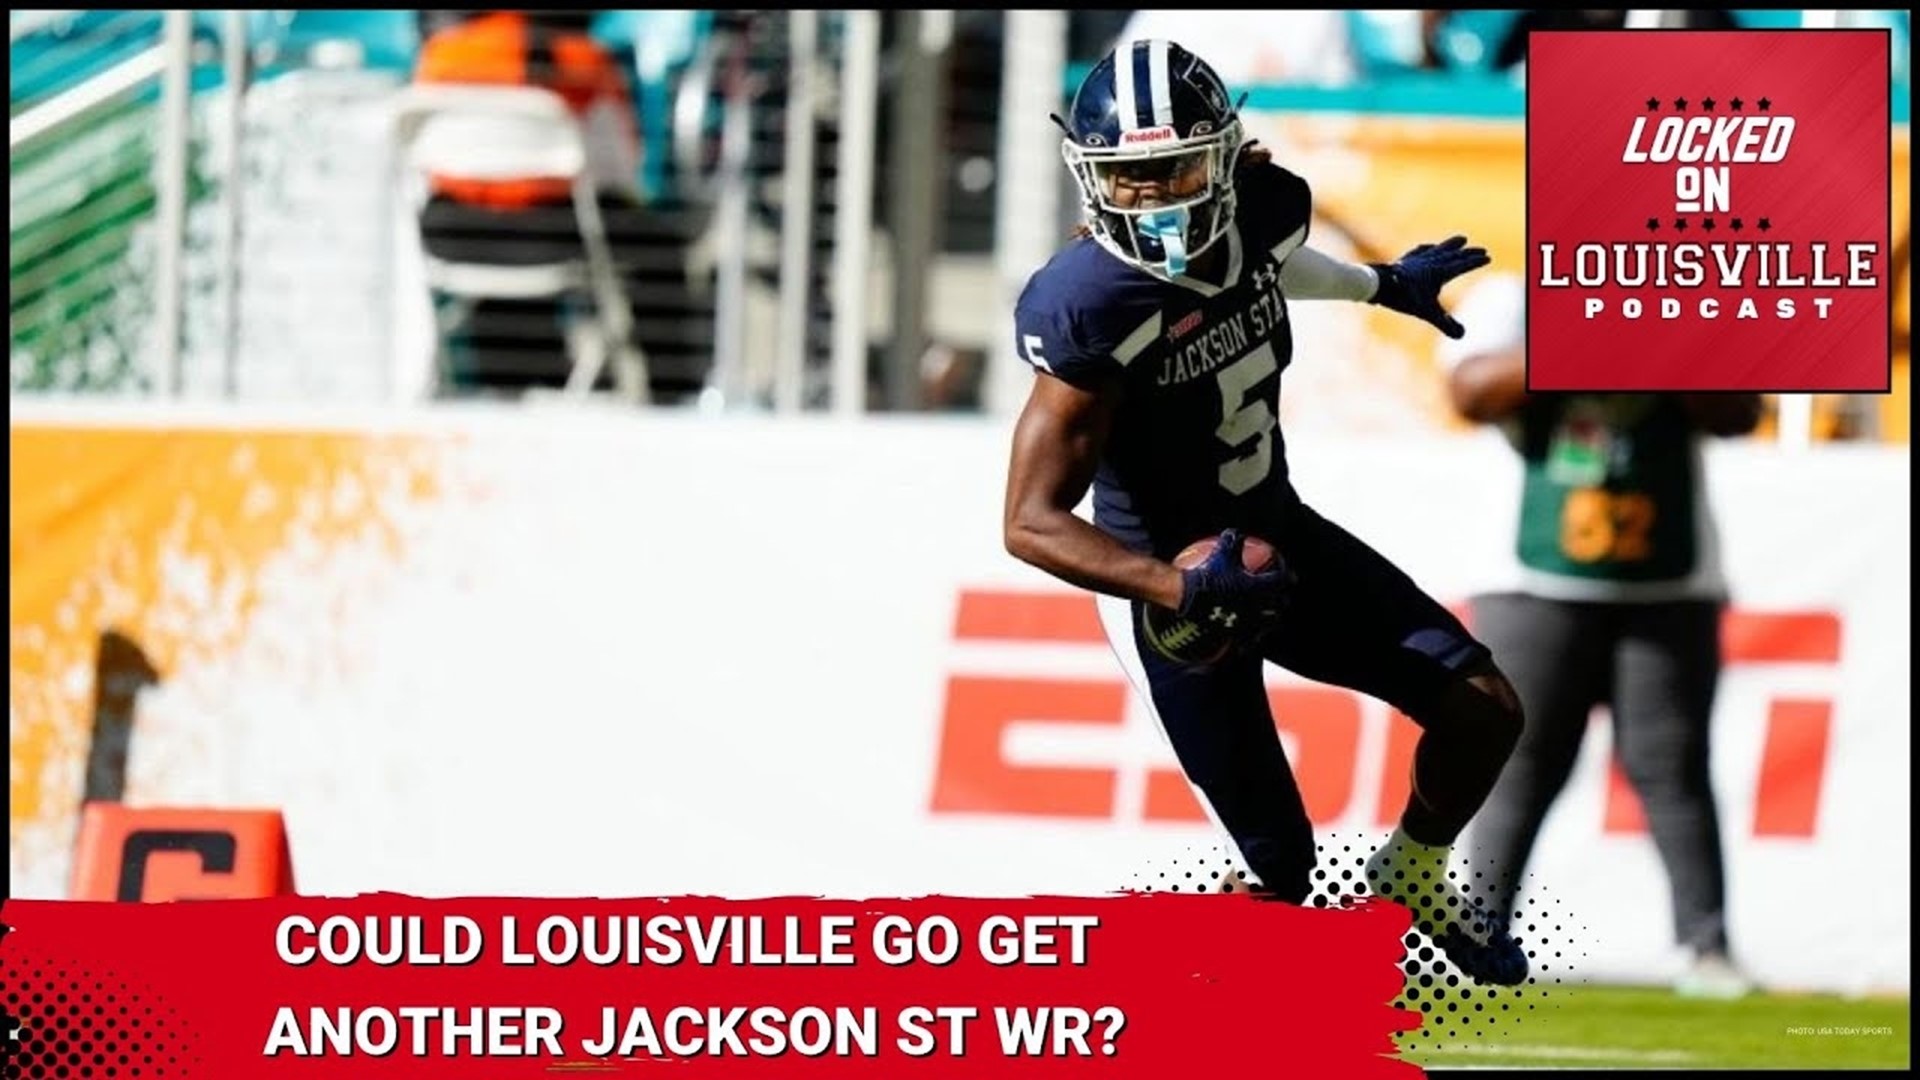 Shane "Hollywood" Hooks: can the Louisville Cardinals go get another Jackson State WR transfer?